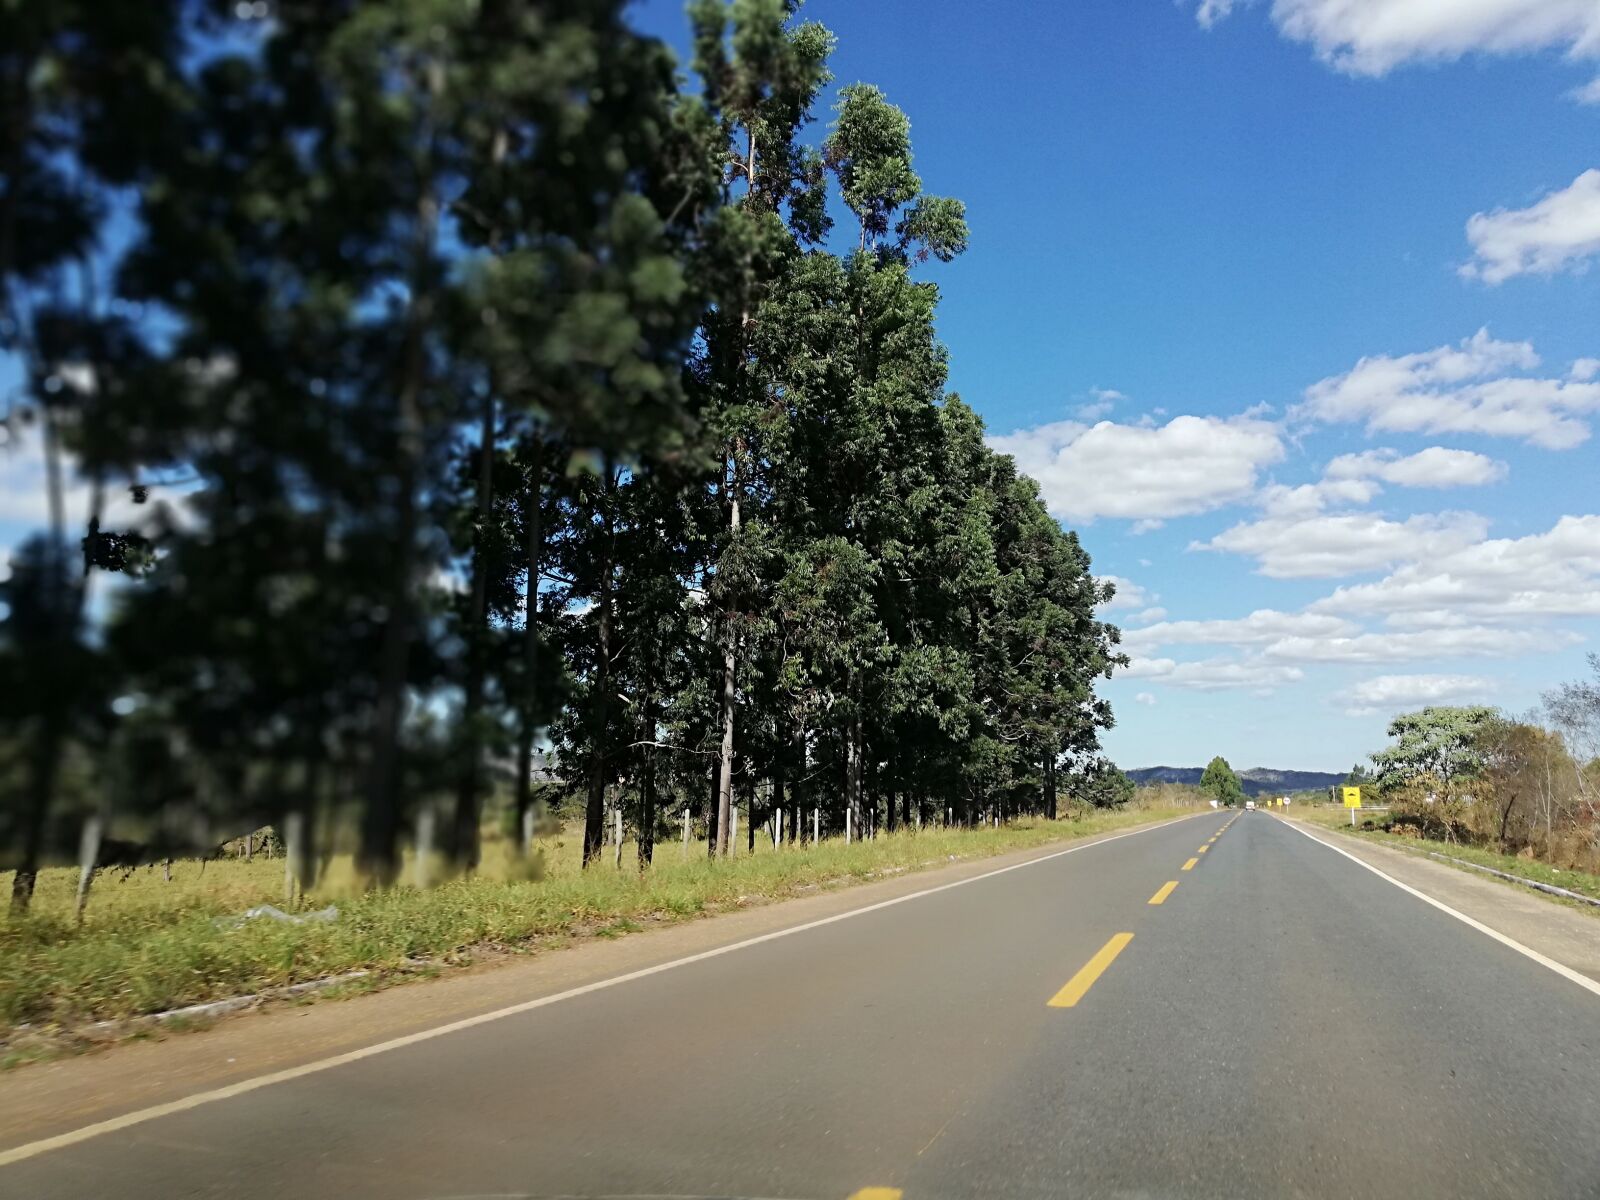 HUAWEI Mate 10 Lite sample photo. The nature center, road photography